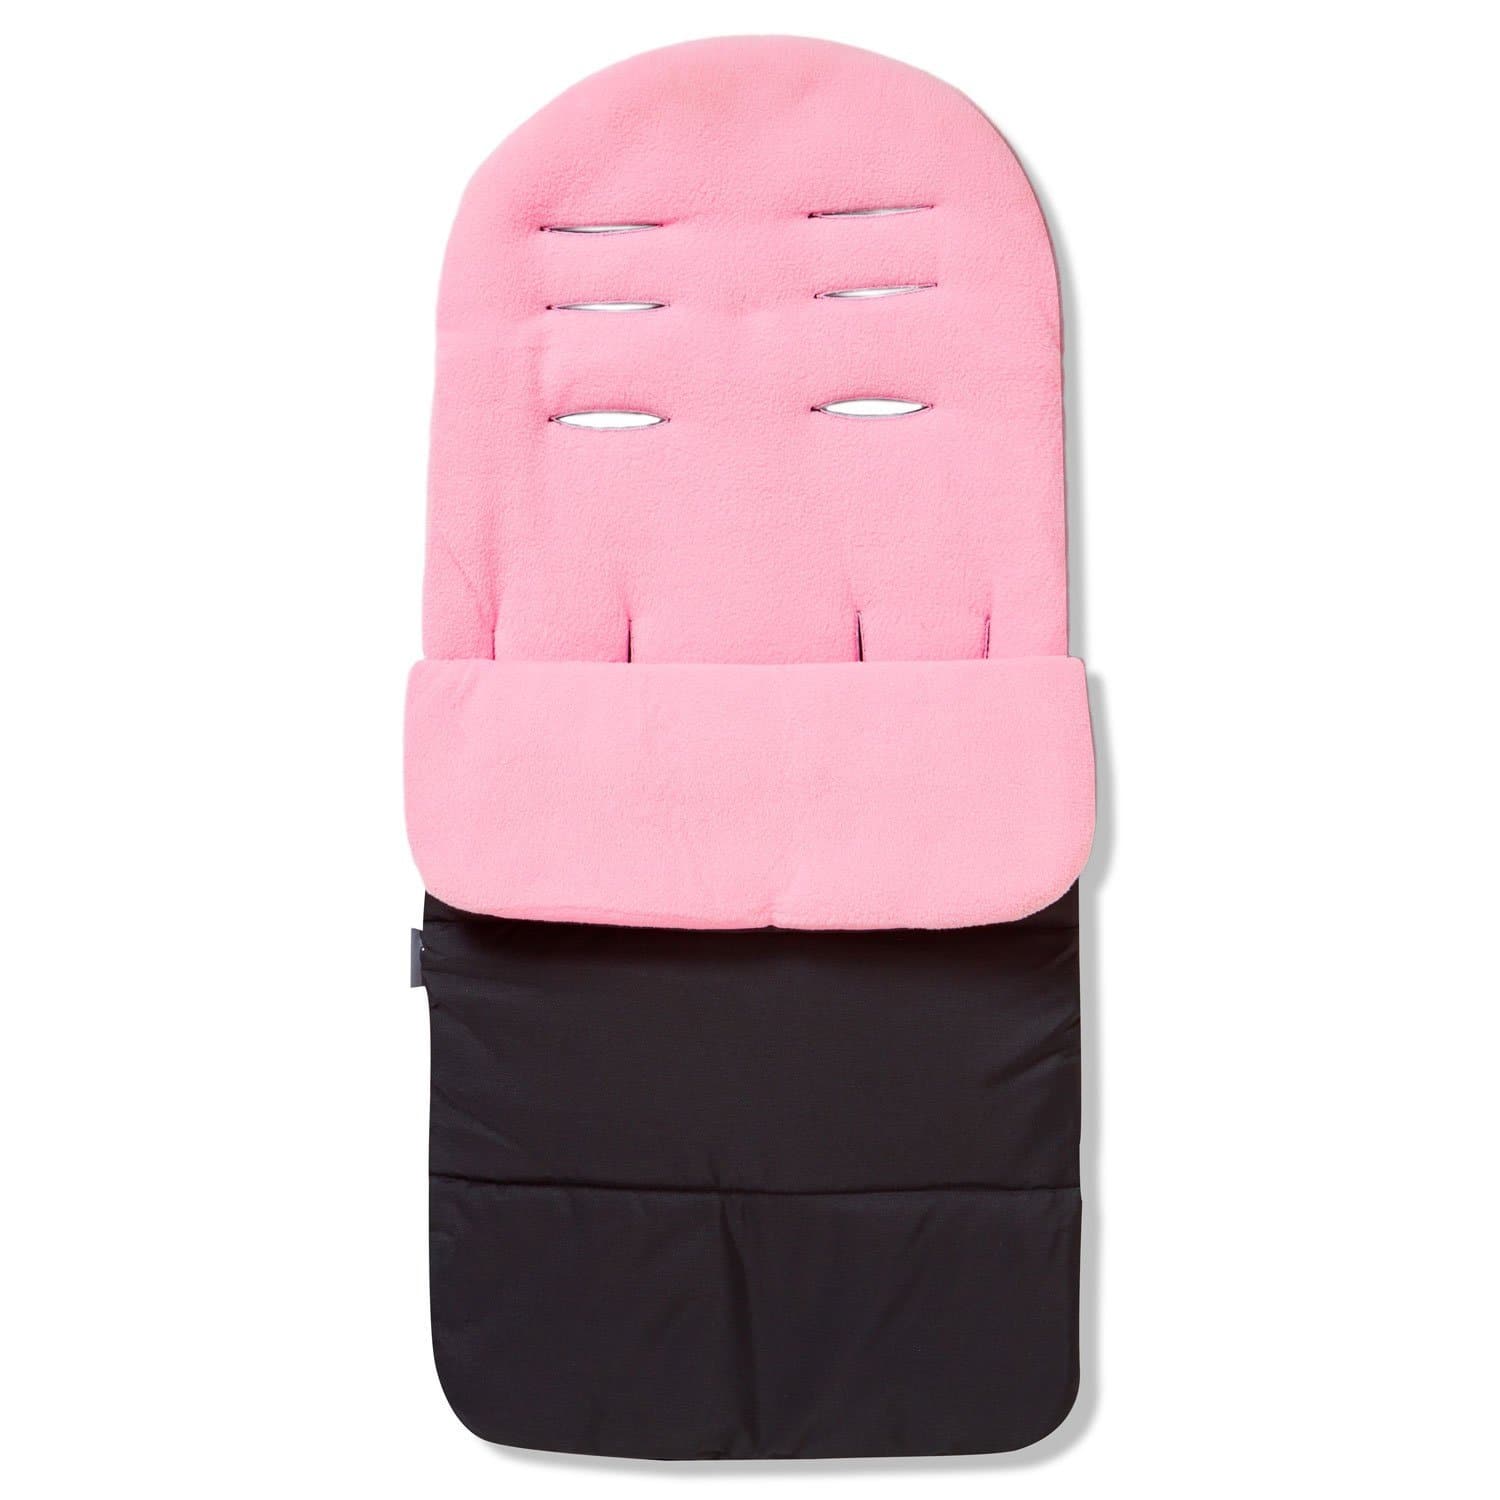 Premium Footmuff / Cosy Toes Compatible with Kinderkraft - Candy Pink / Fits All Models | For Your Little One